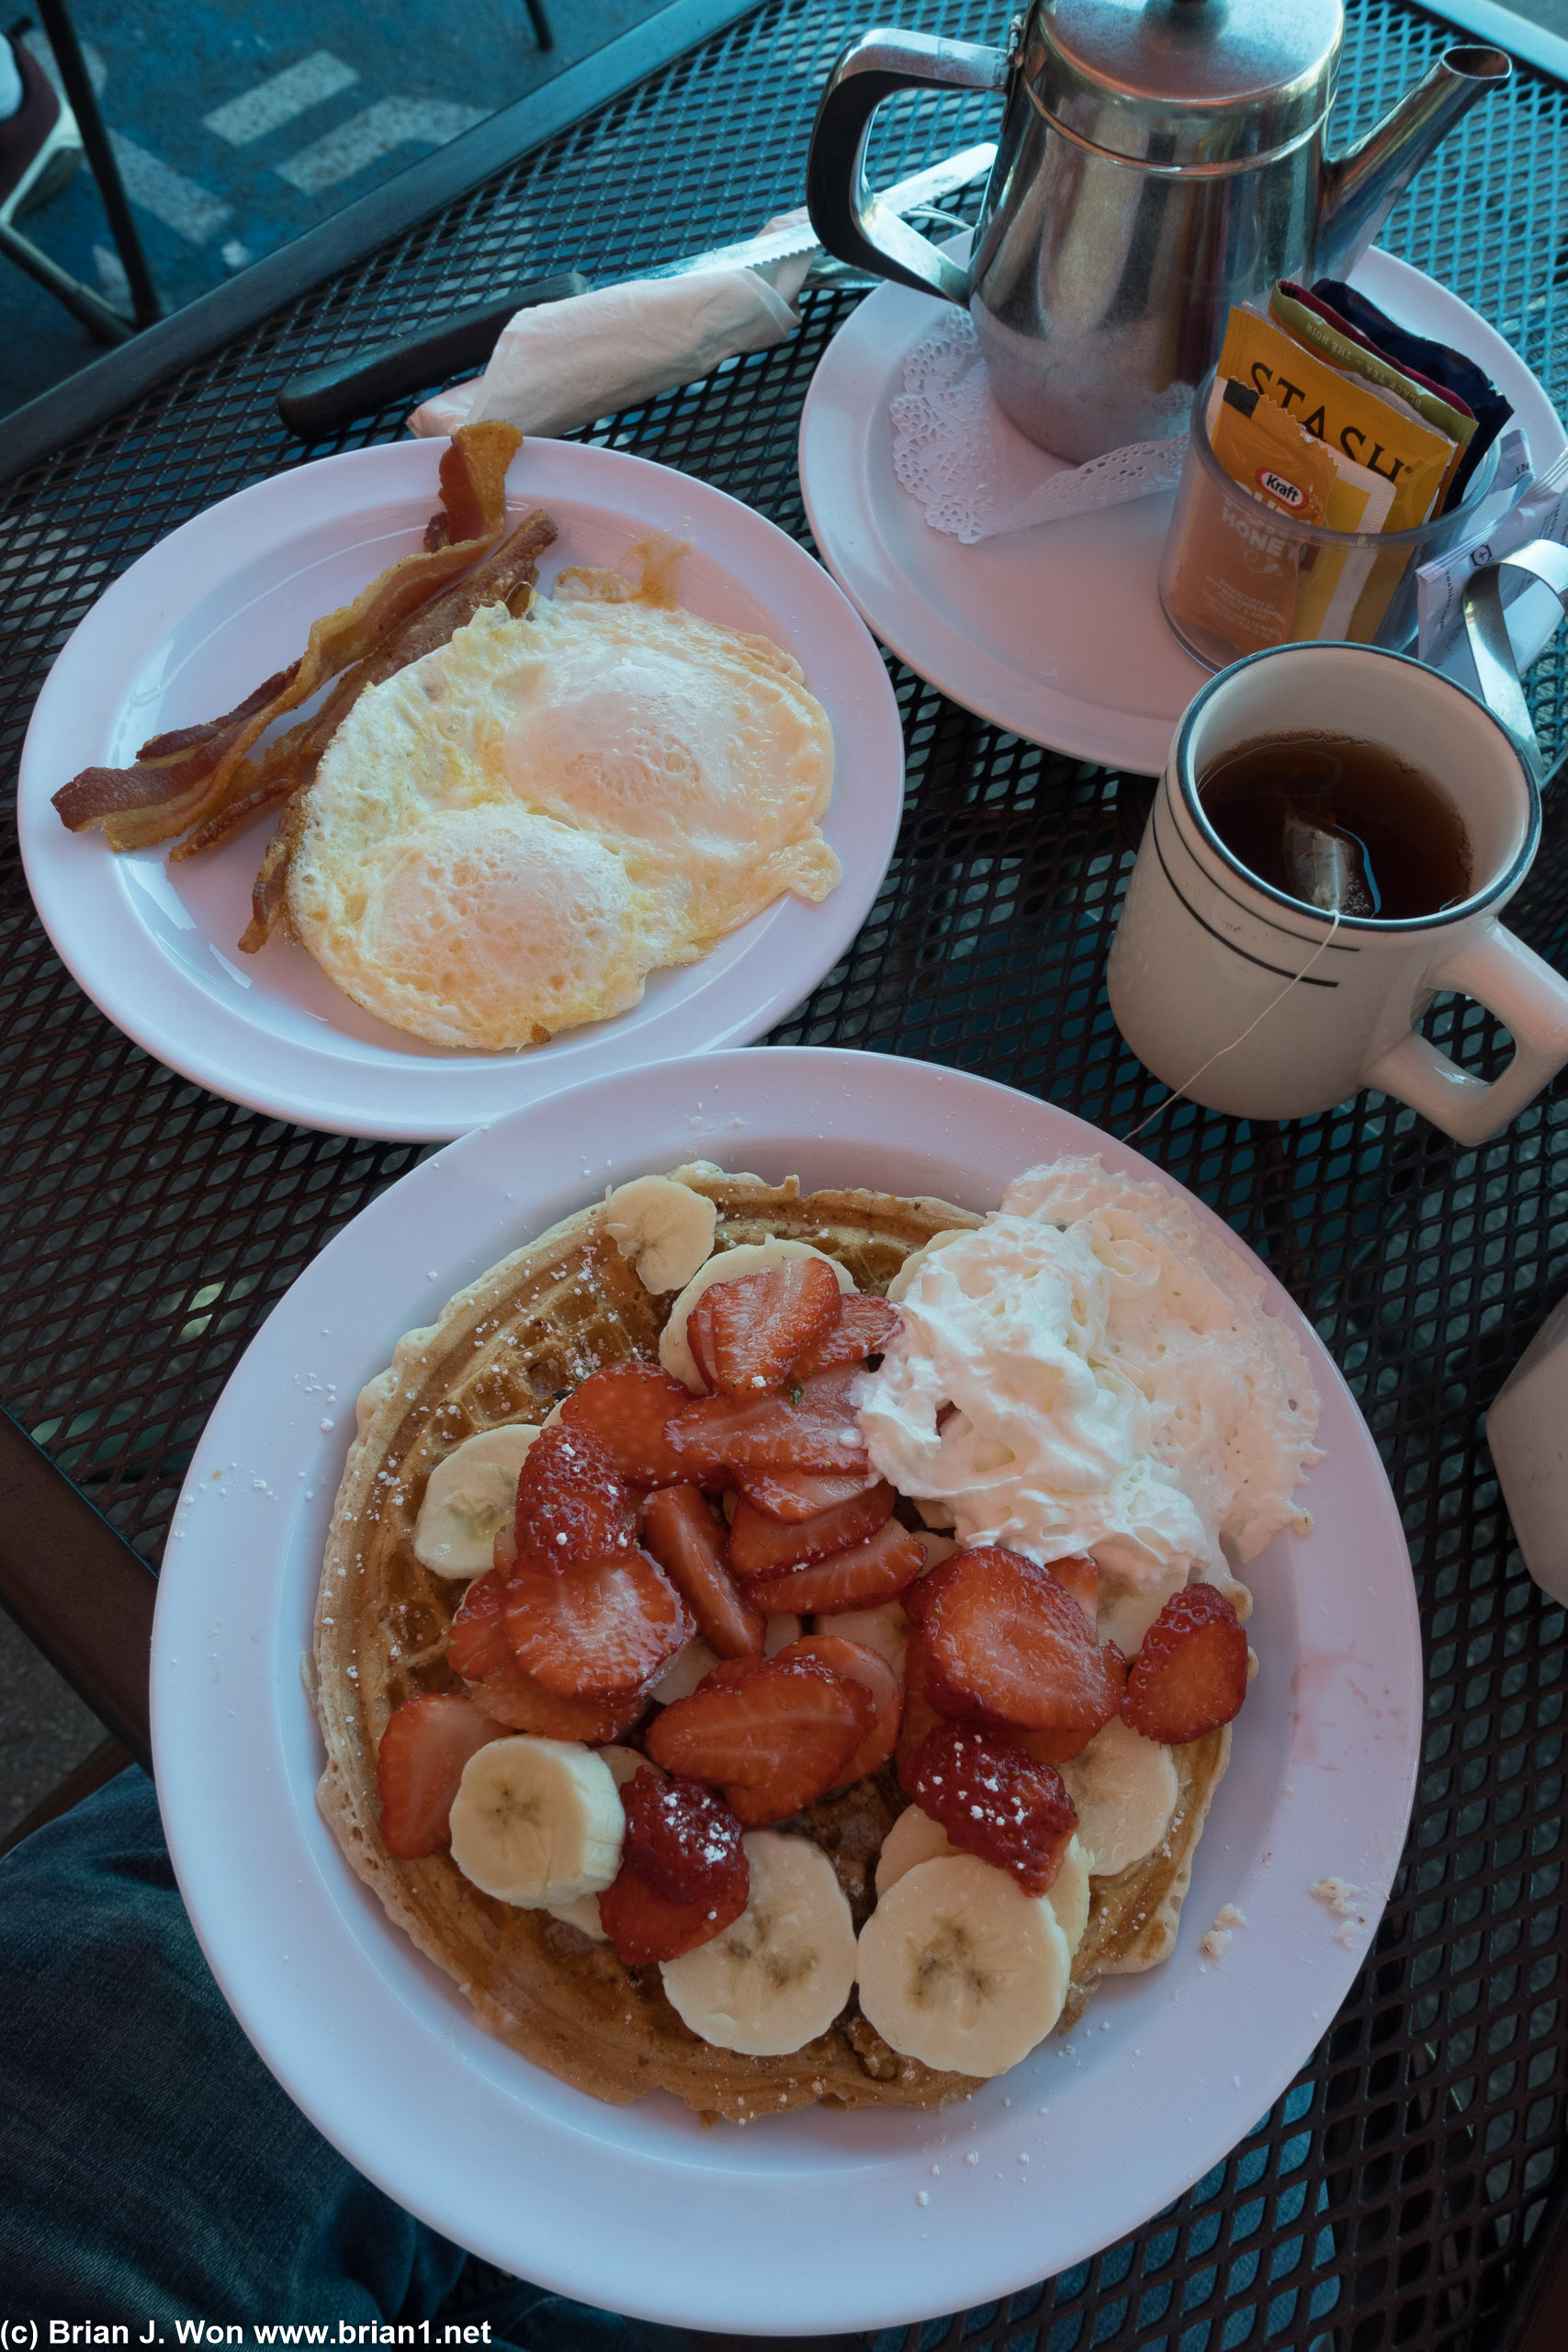 Banana nut with strawberries, plus bacon and eggs.